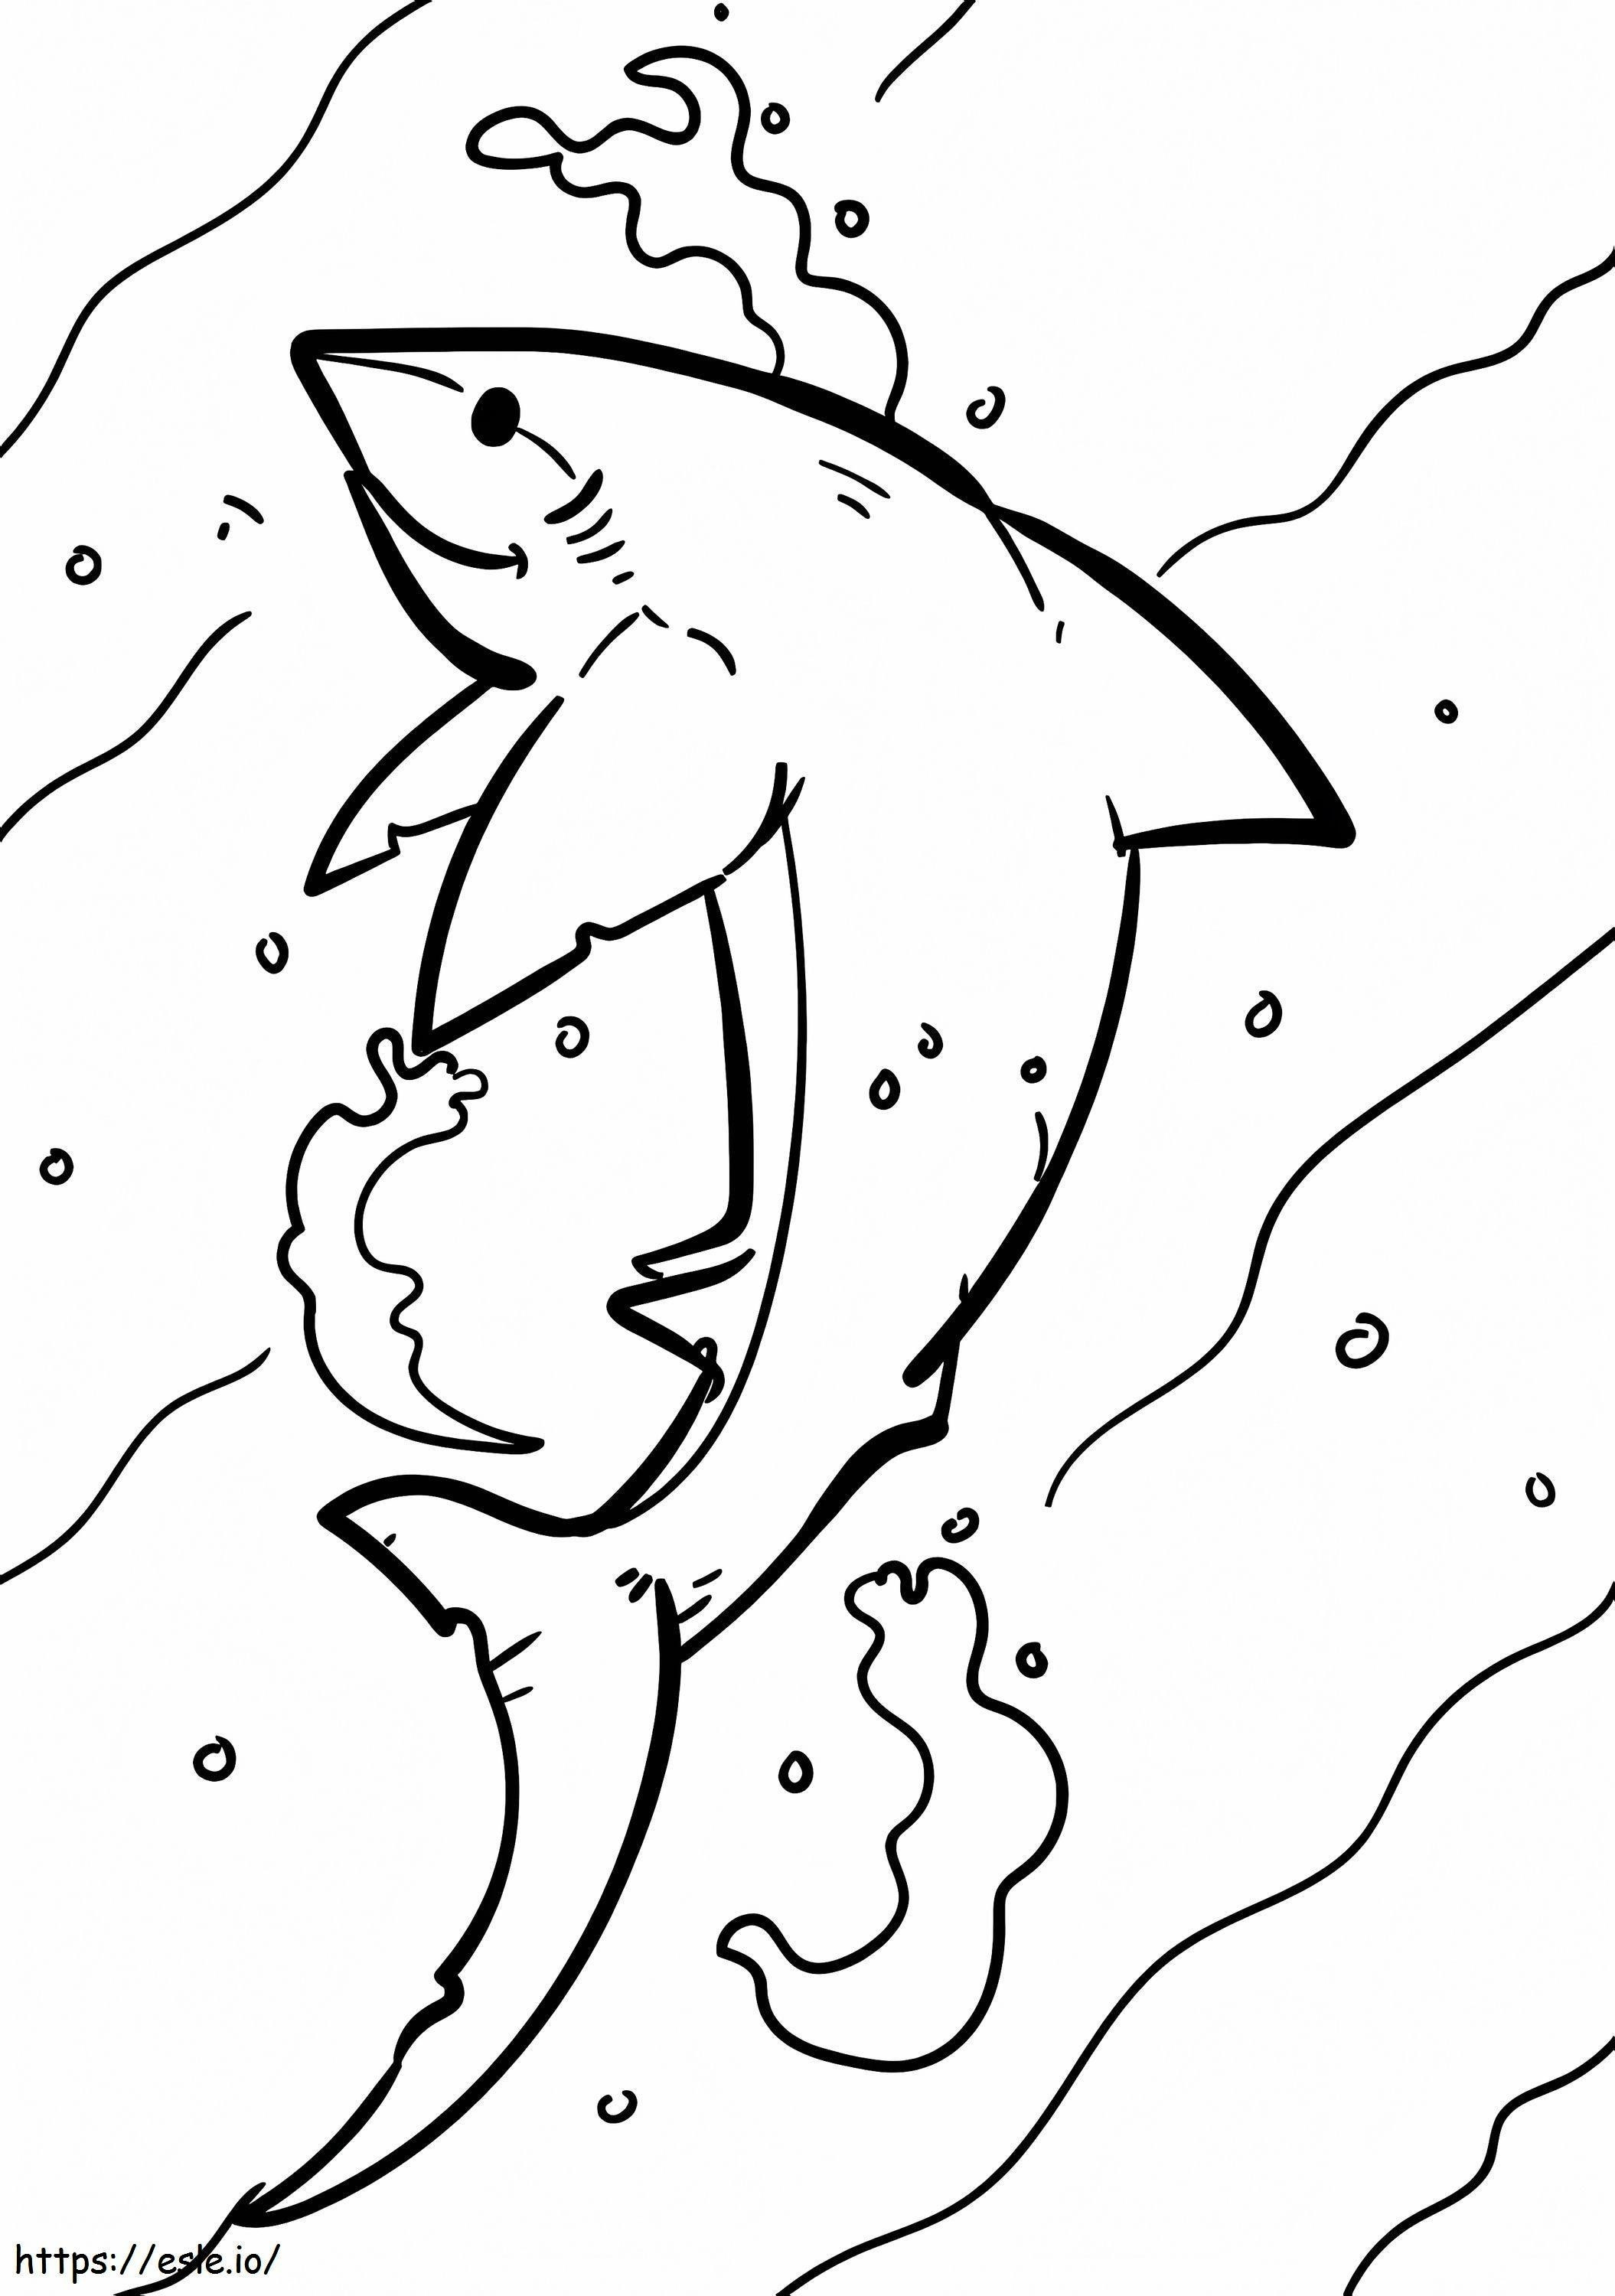 Printable Happy Shark coloring page